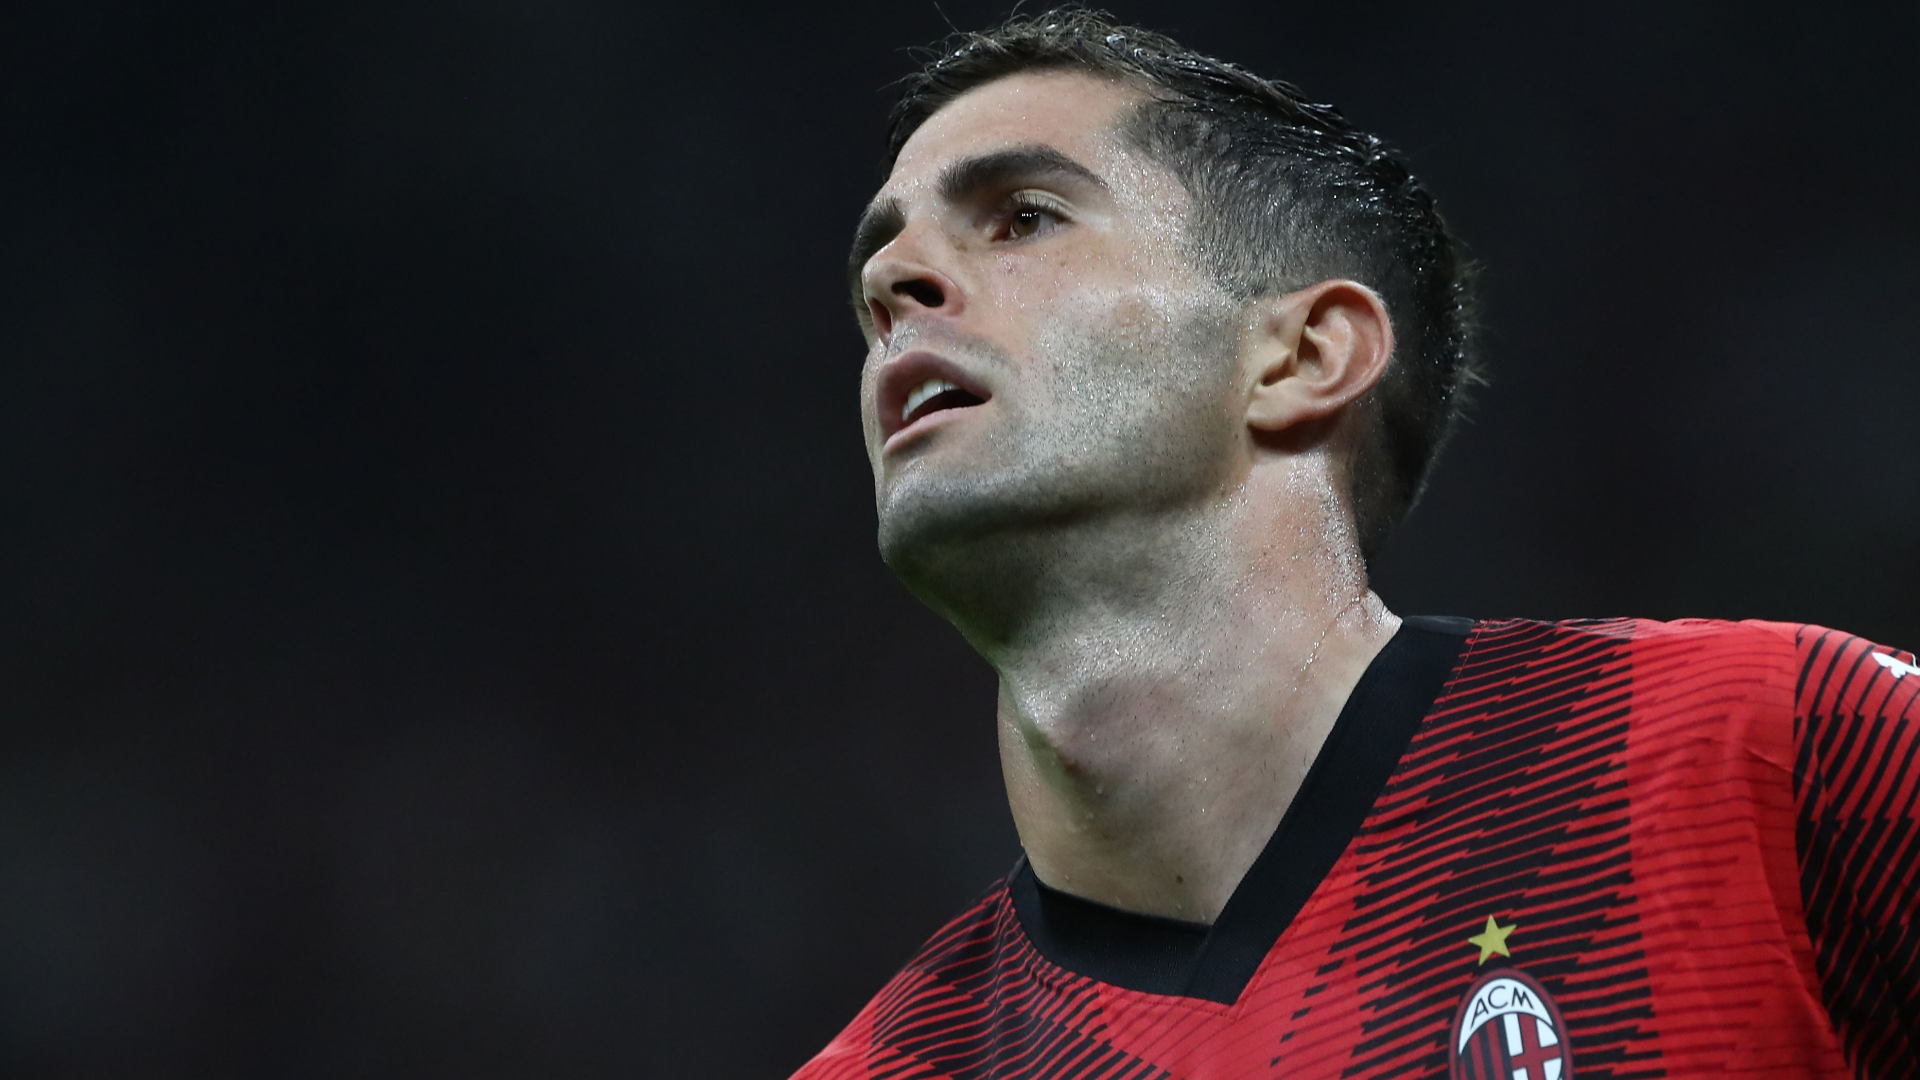 Position change for Christian Pulisic? AC Milan urged to move USMNT star in order to get all of their attacking weapons into one starting XI